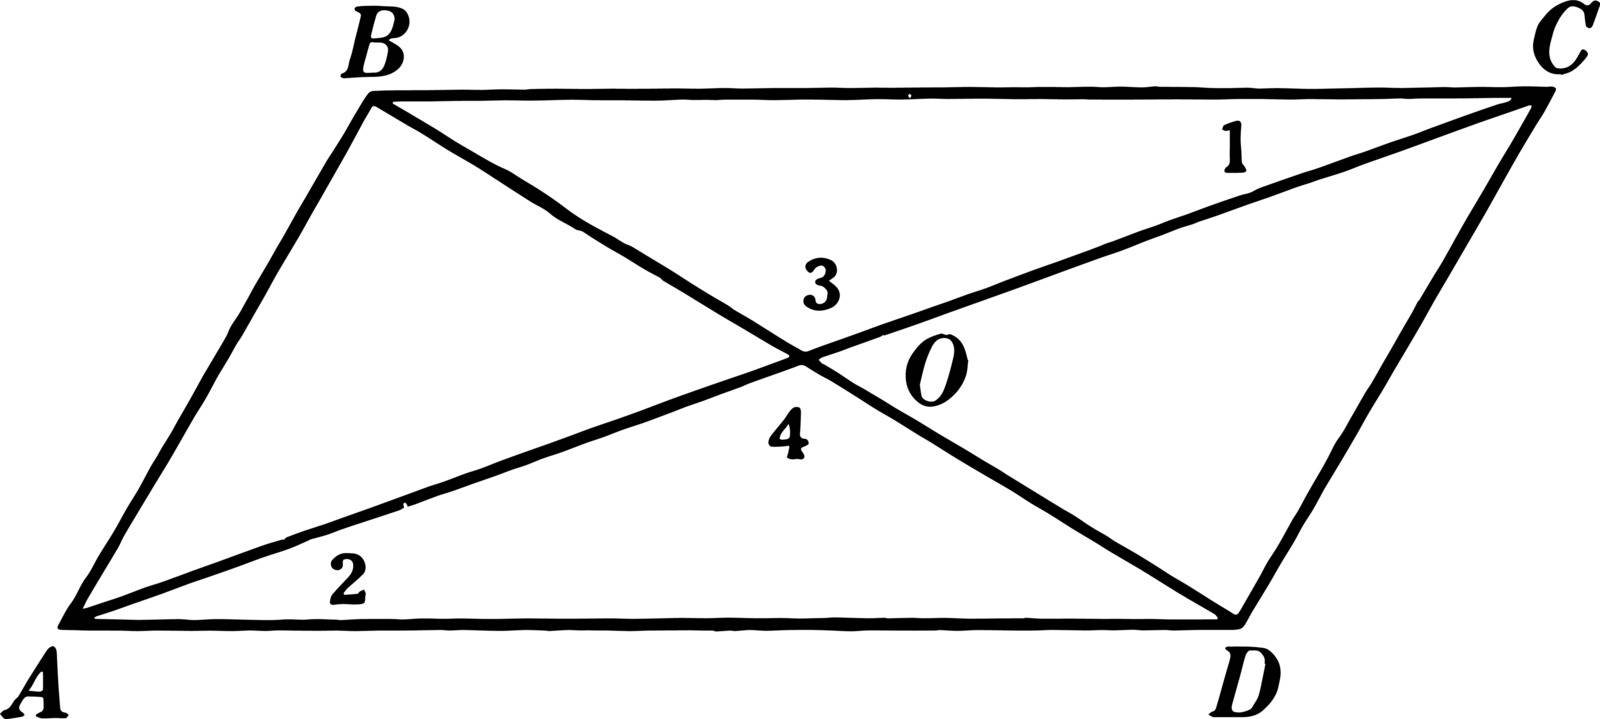 An image that shows a parallelogram. In this parallelogram two diagonals AC and BD are drawn, vintage line drawing or engraving illustration.